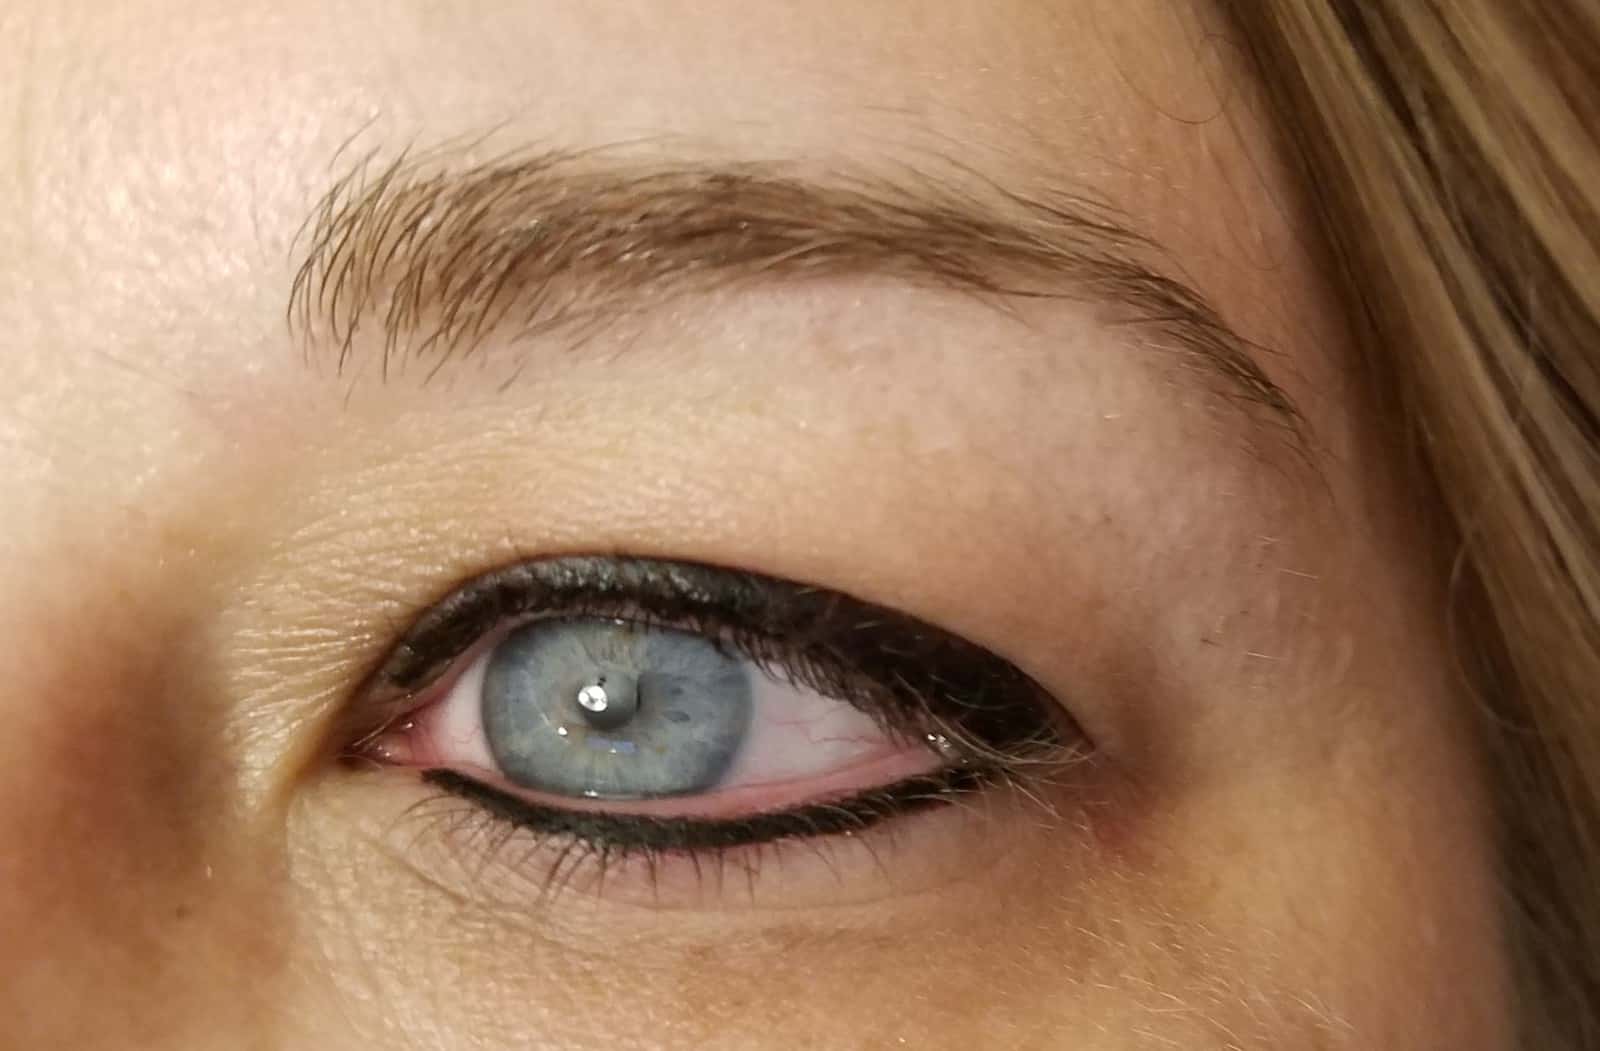 Help, My Permanent Eyeliner Disappeared! What Do I Do?